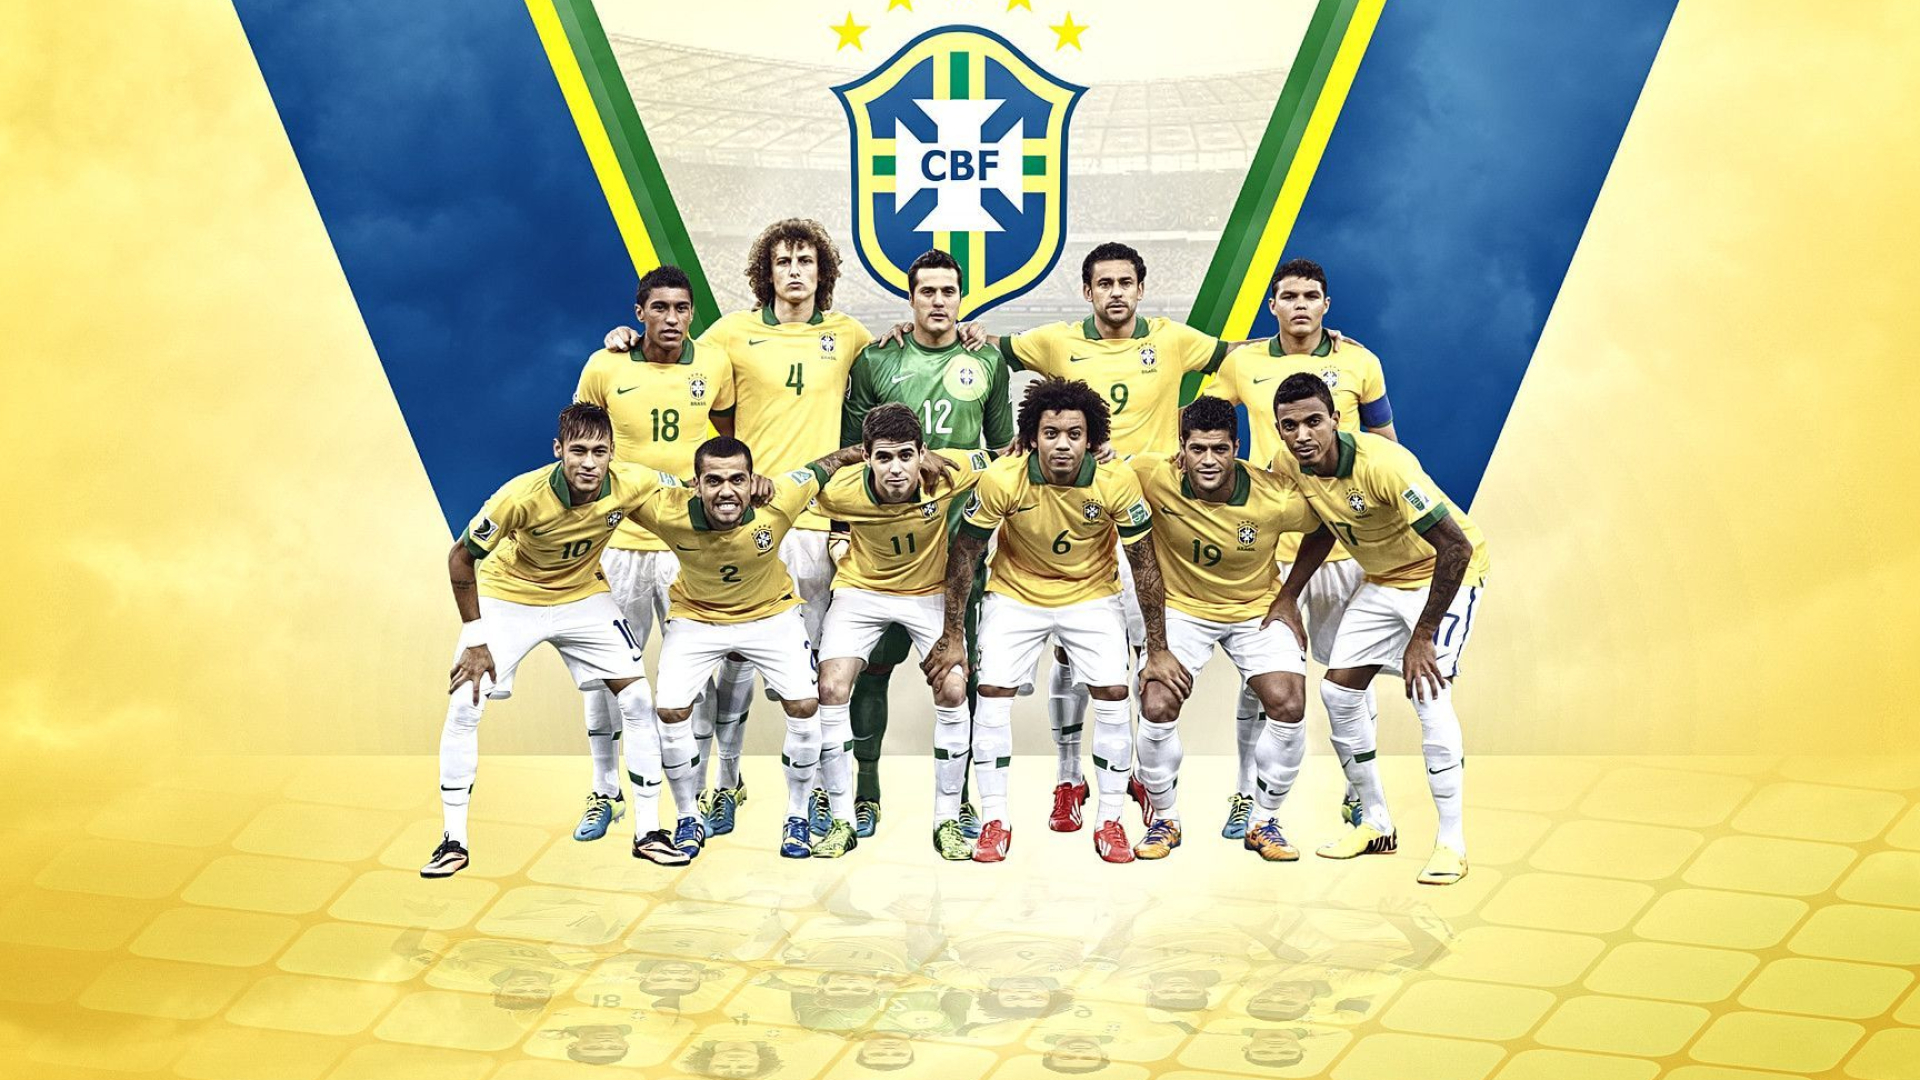 1920x1080 Cool Brazil national team 2014 images for wallpaper in HD ... | National football teams, Brazil football team, Football team